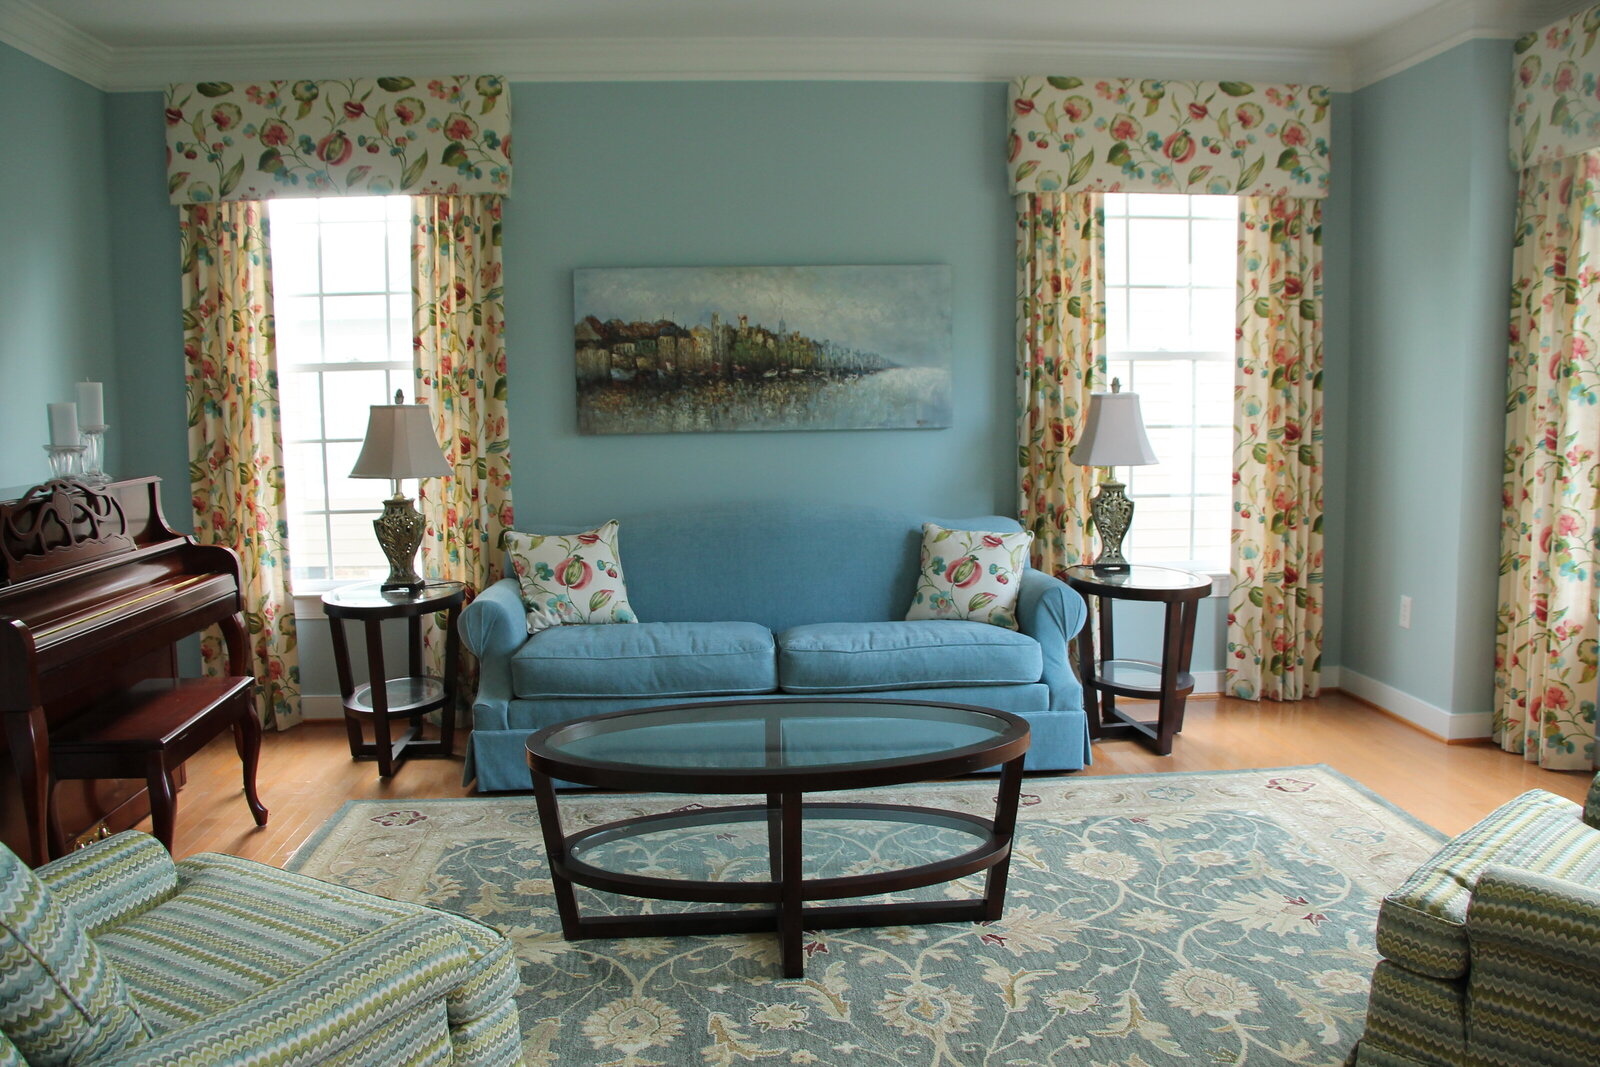 Bedeckers Interiors - Kristine Gregory - Charter Colony (1)